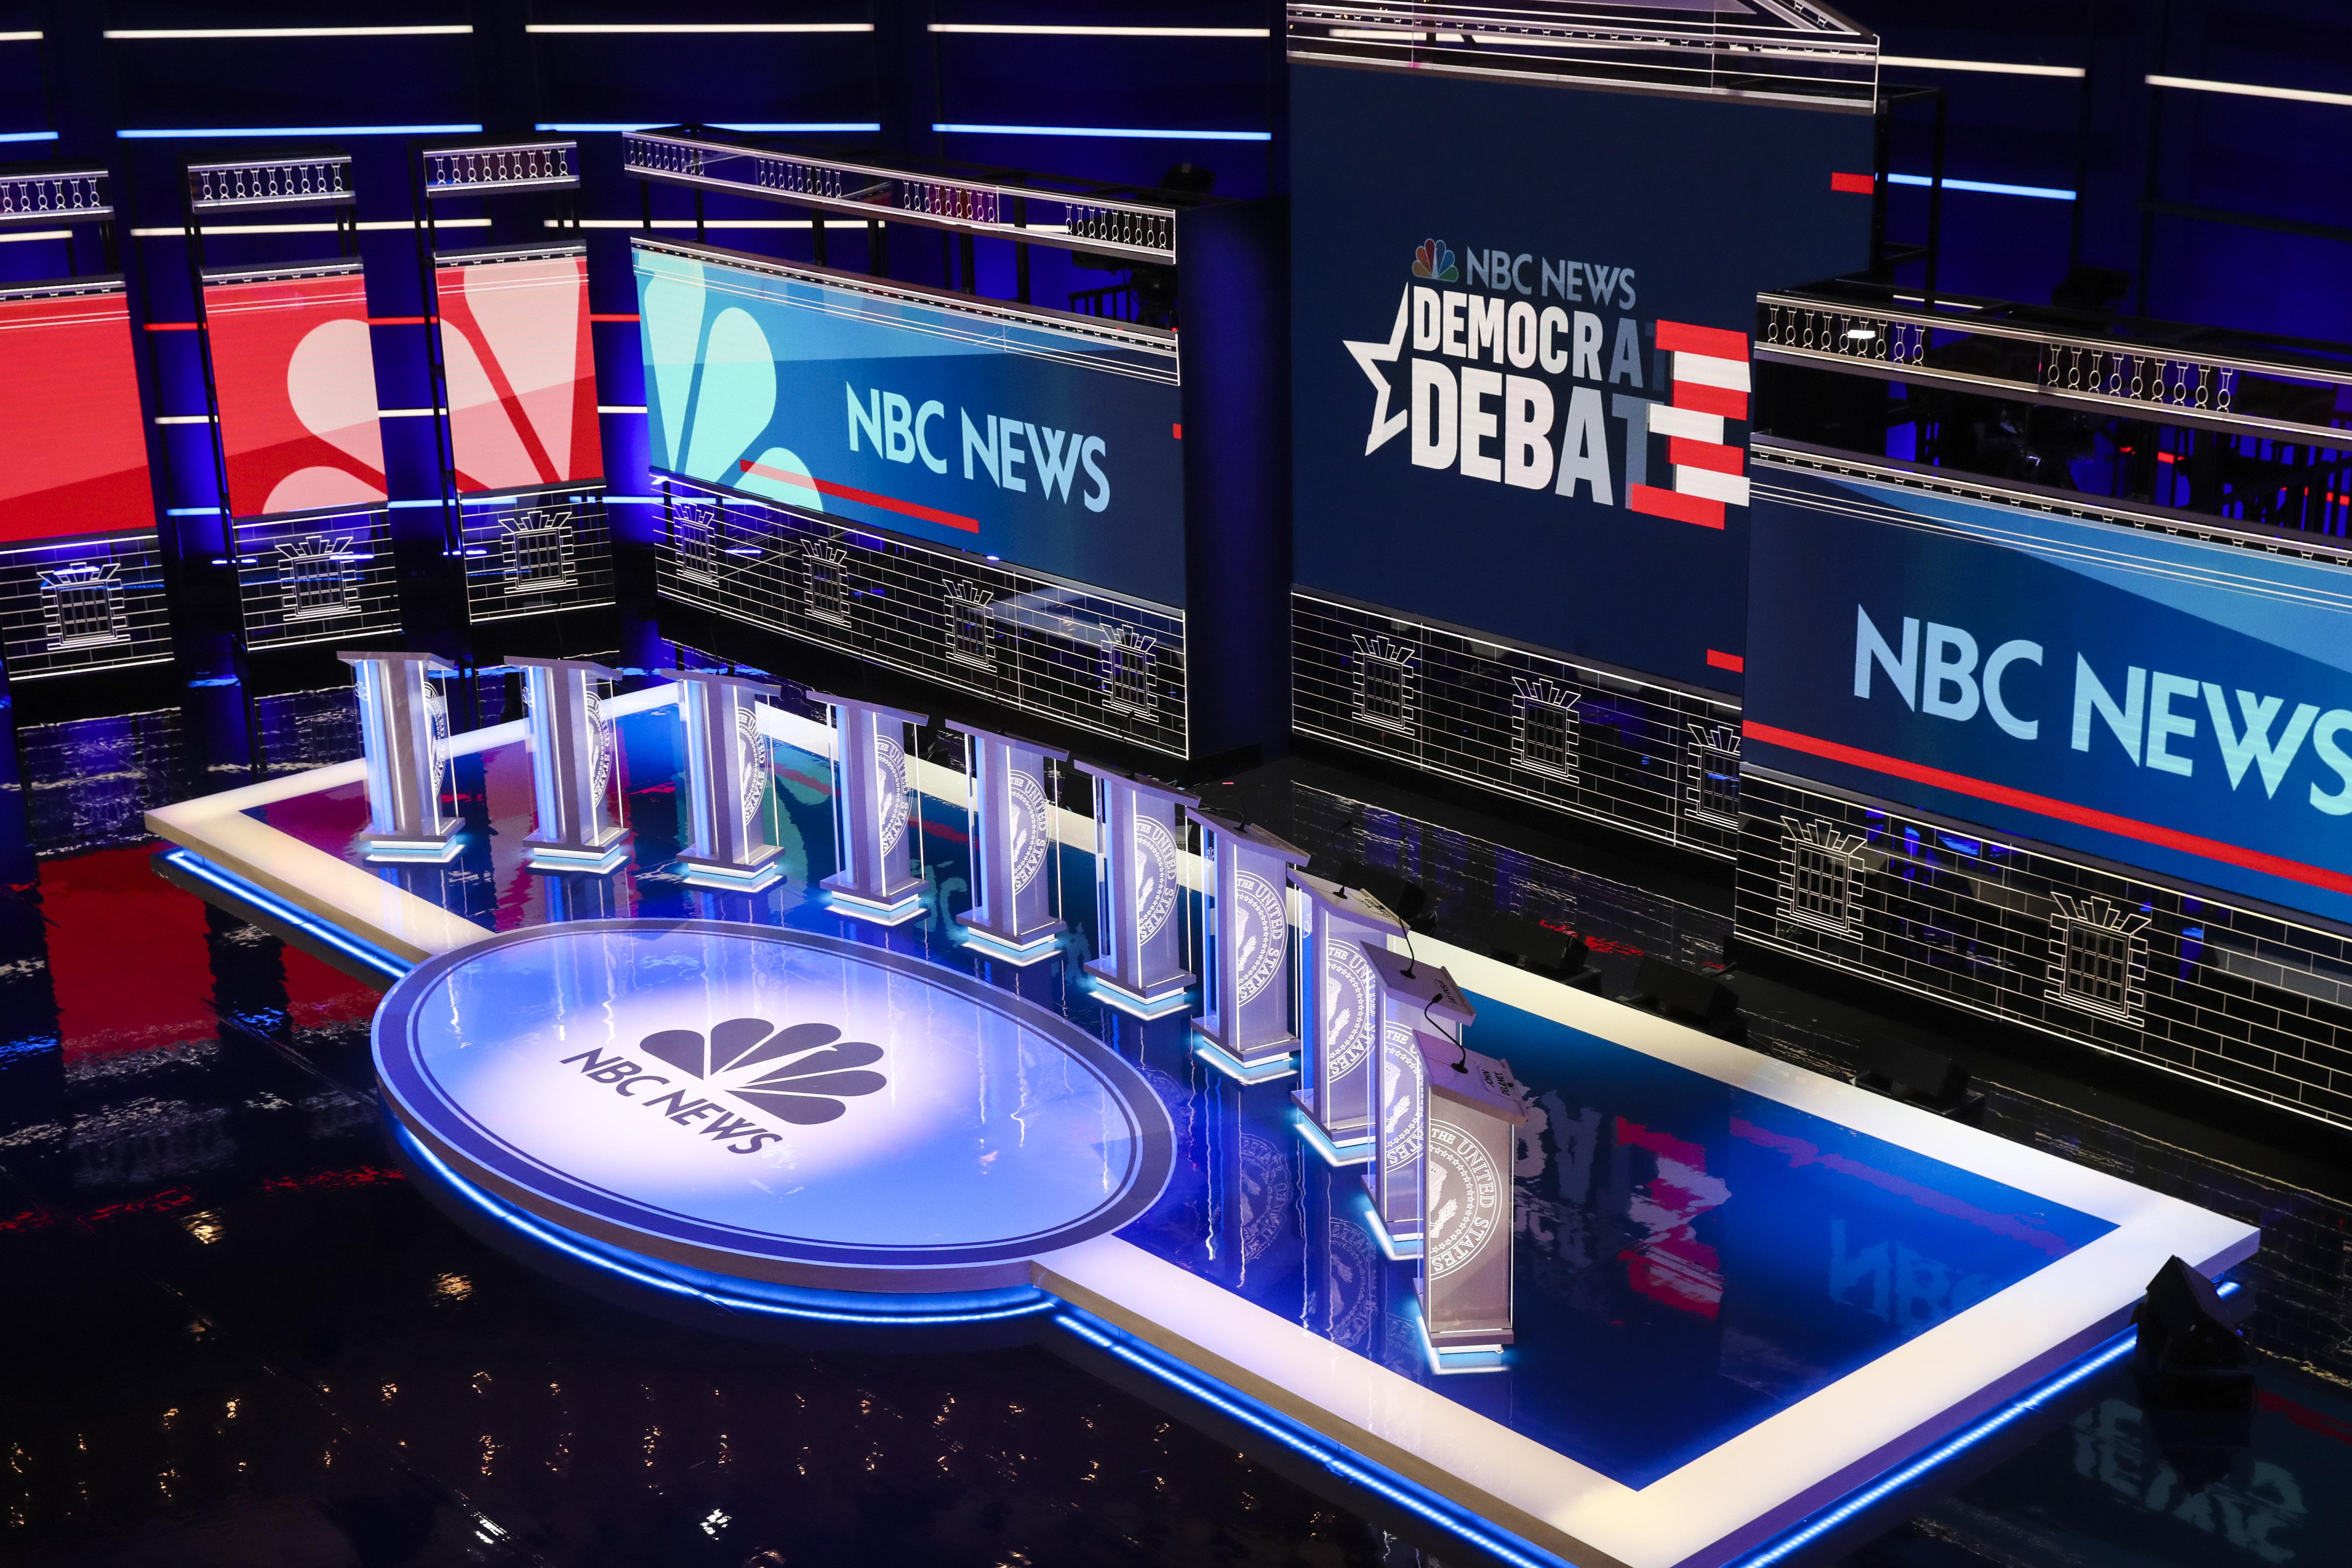 The empty stage boasting the NBC News logo that will soon host the candidates in the first DNC presidential debate. 